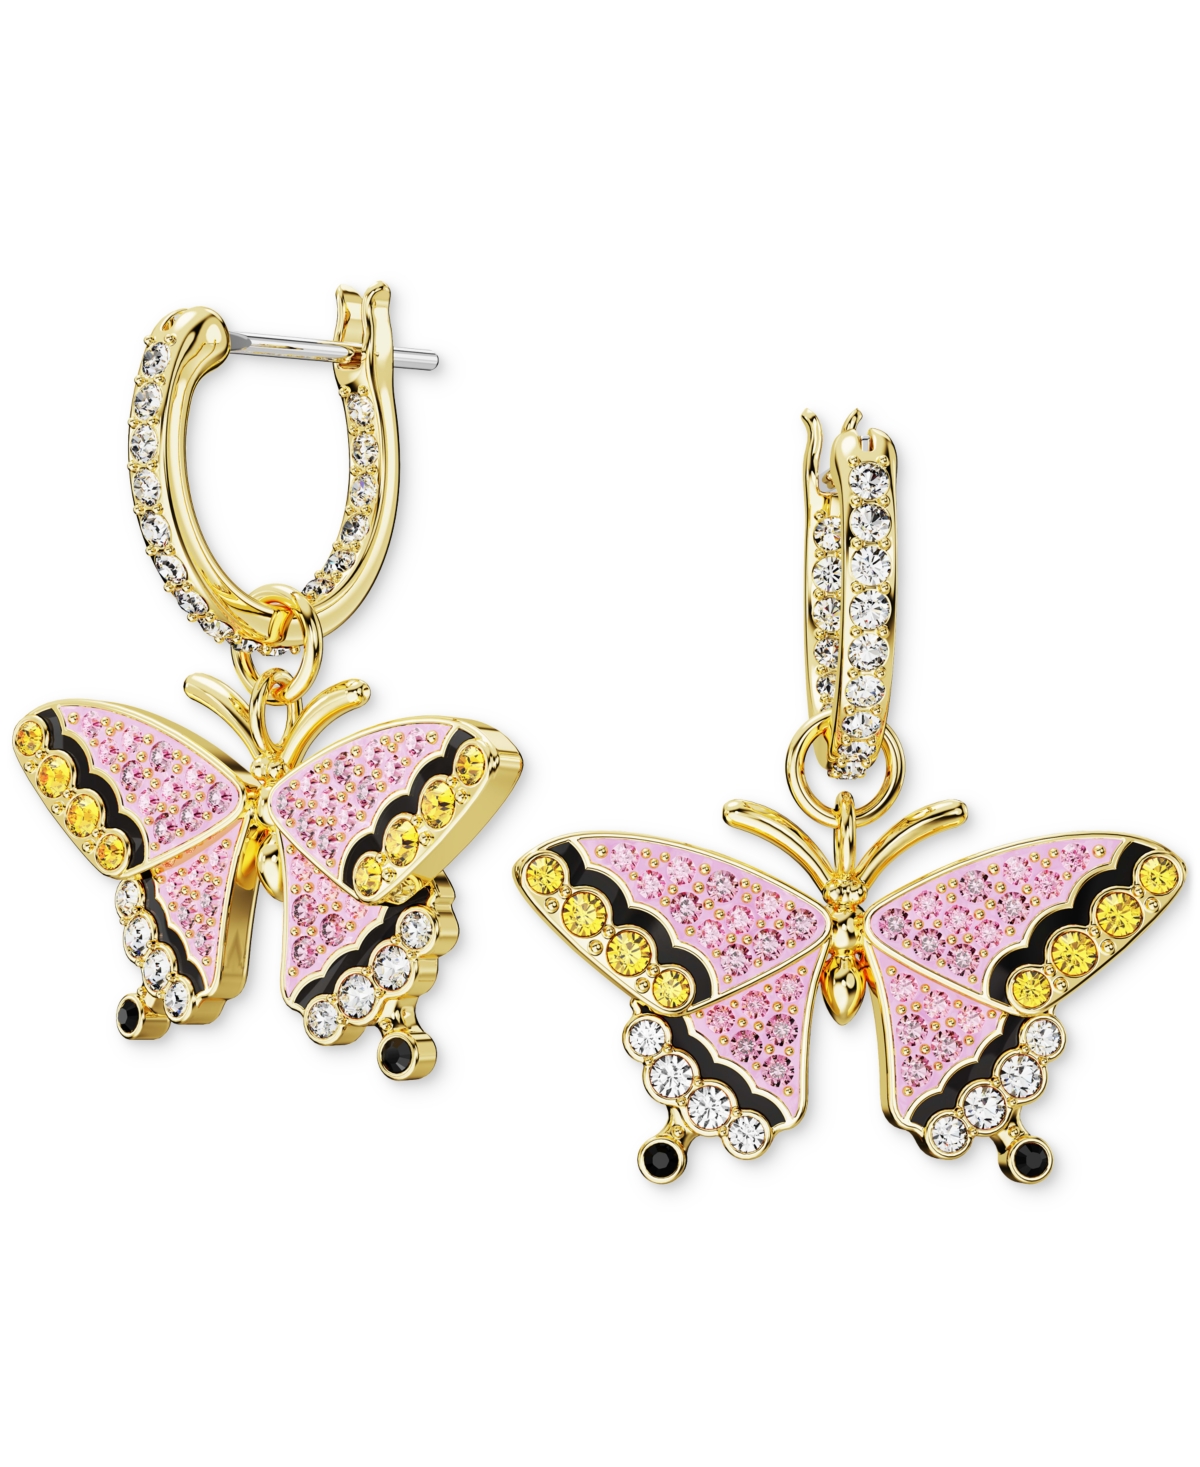 Swarovski Gold-tone Multicolor Pave Butterfly Charm Hoop Earrings In Multicolored